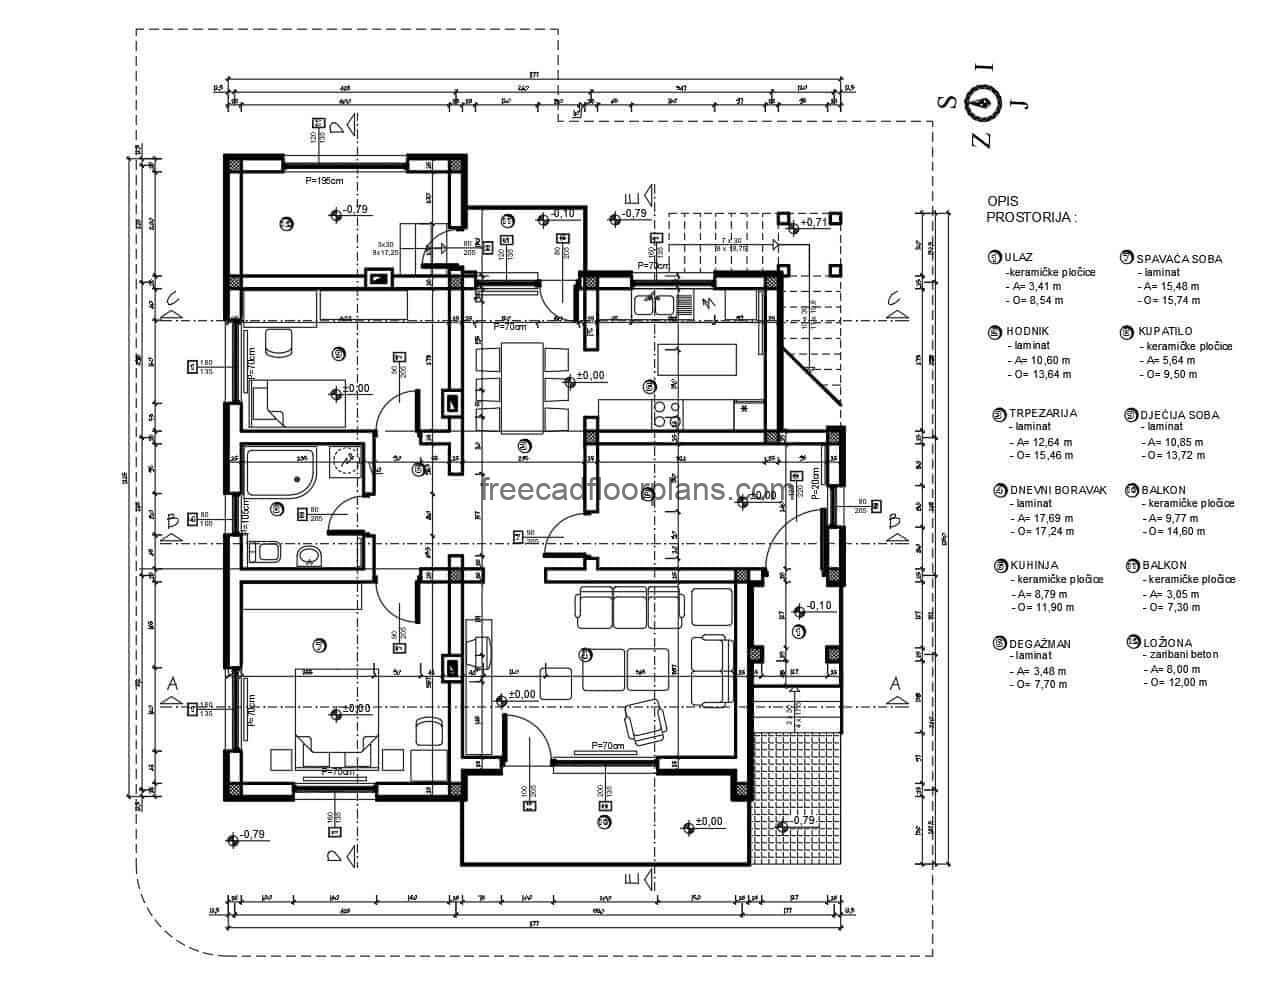 Detailed plans of a one level house, with blocks in DWG autocad, dimensioned and architectural plan.